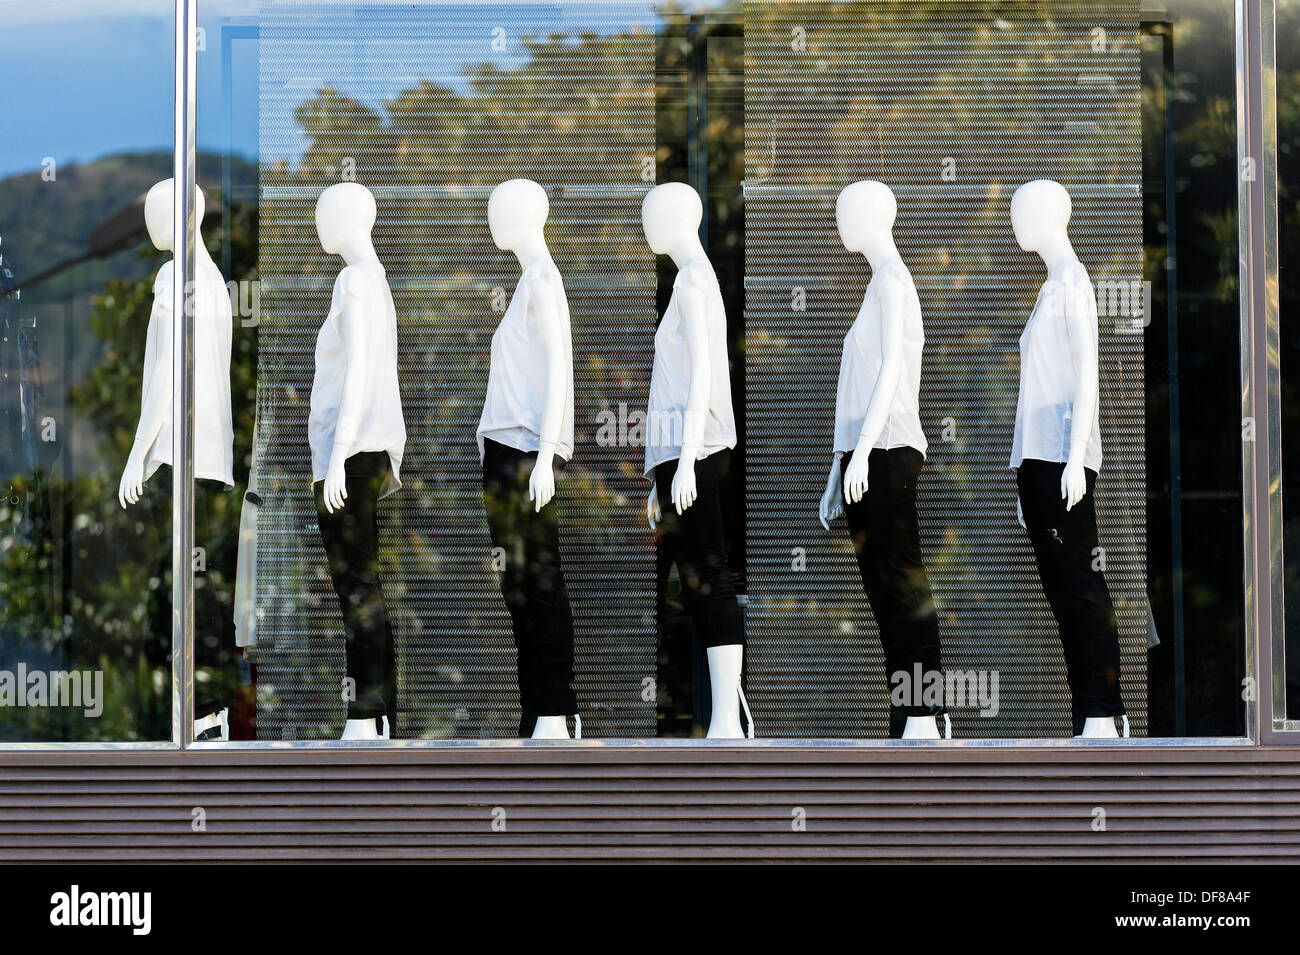 Europe, France, Principality of Monaco, Monte Carlo. Mannequins at the Storefront. Stock Photo